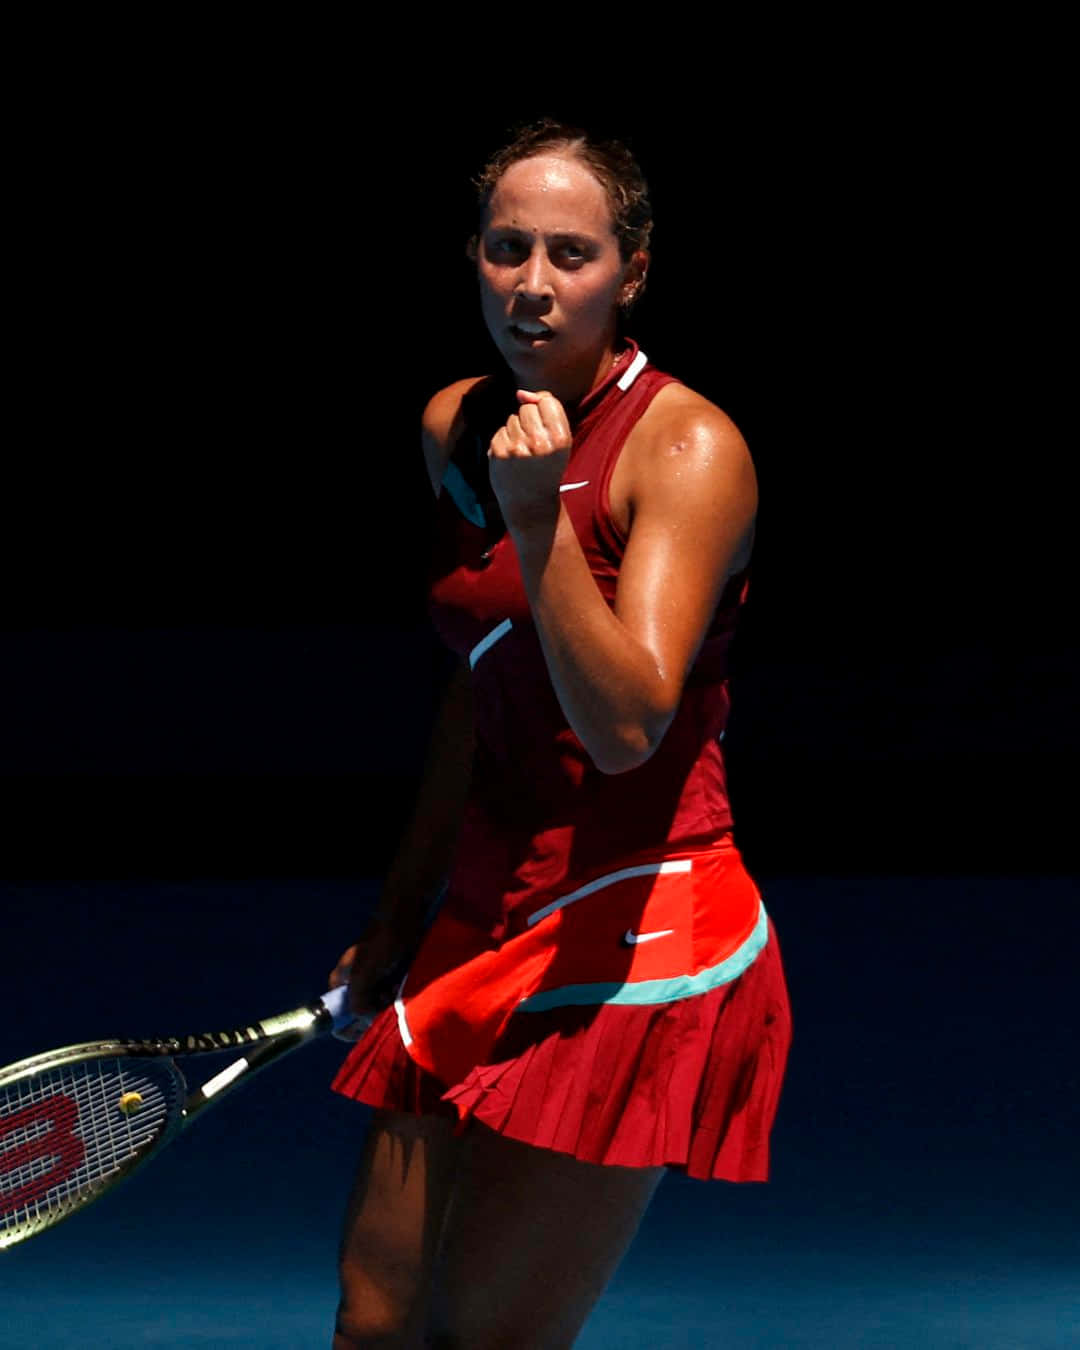 Madison Keys In Red Outfit Wallpaper